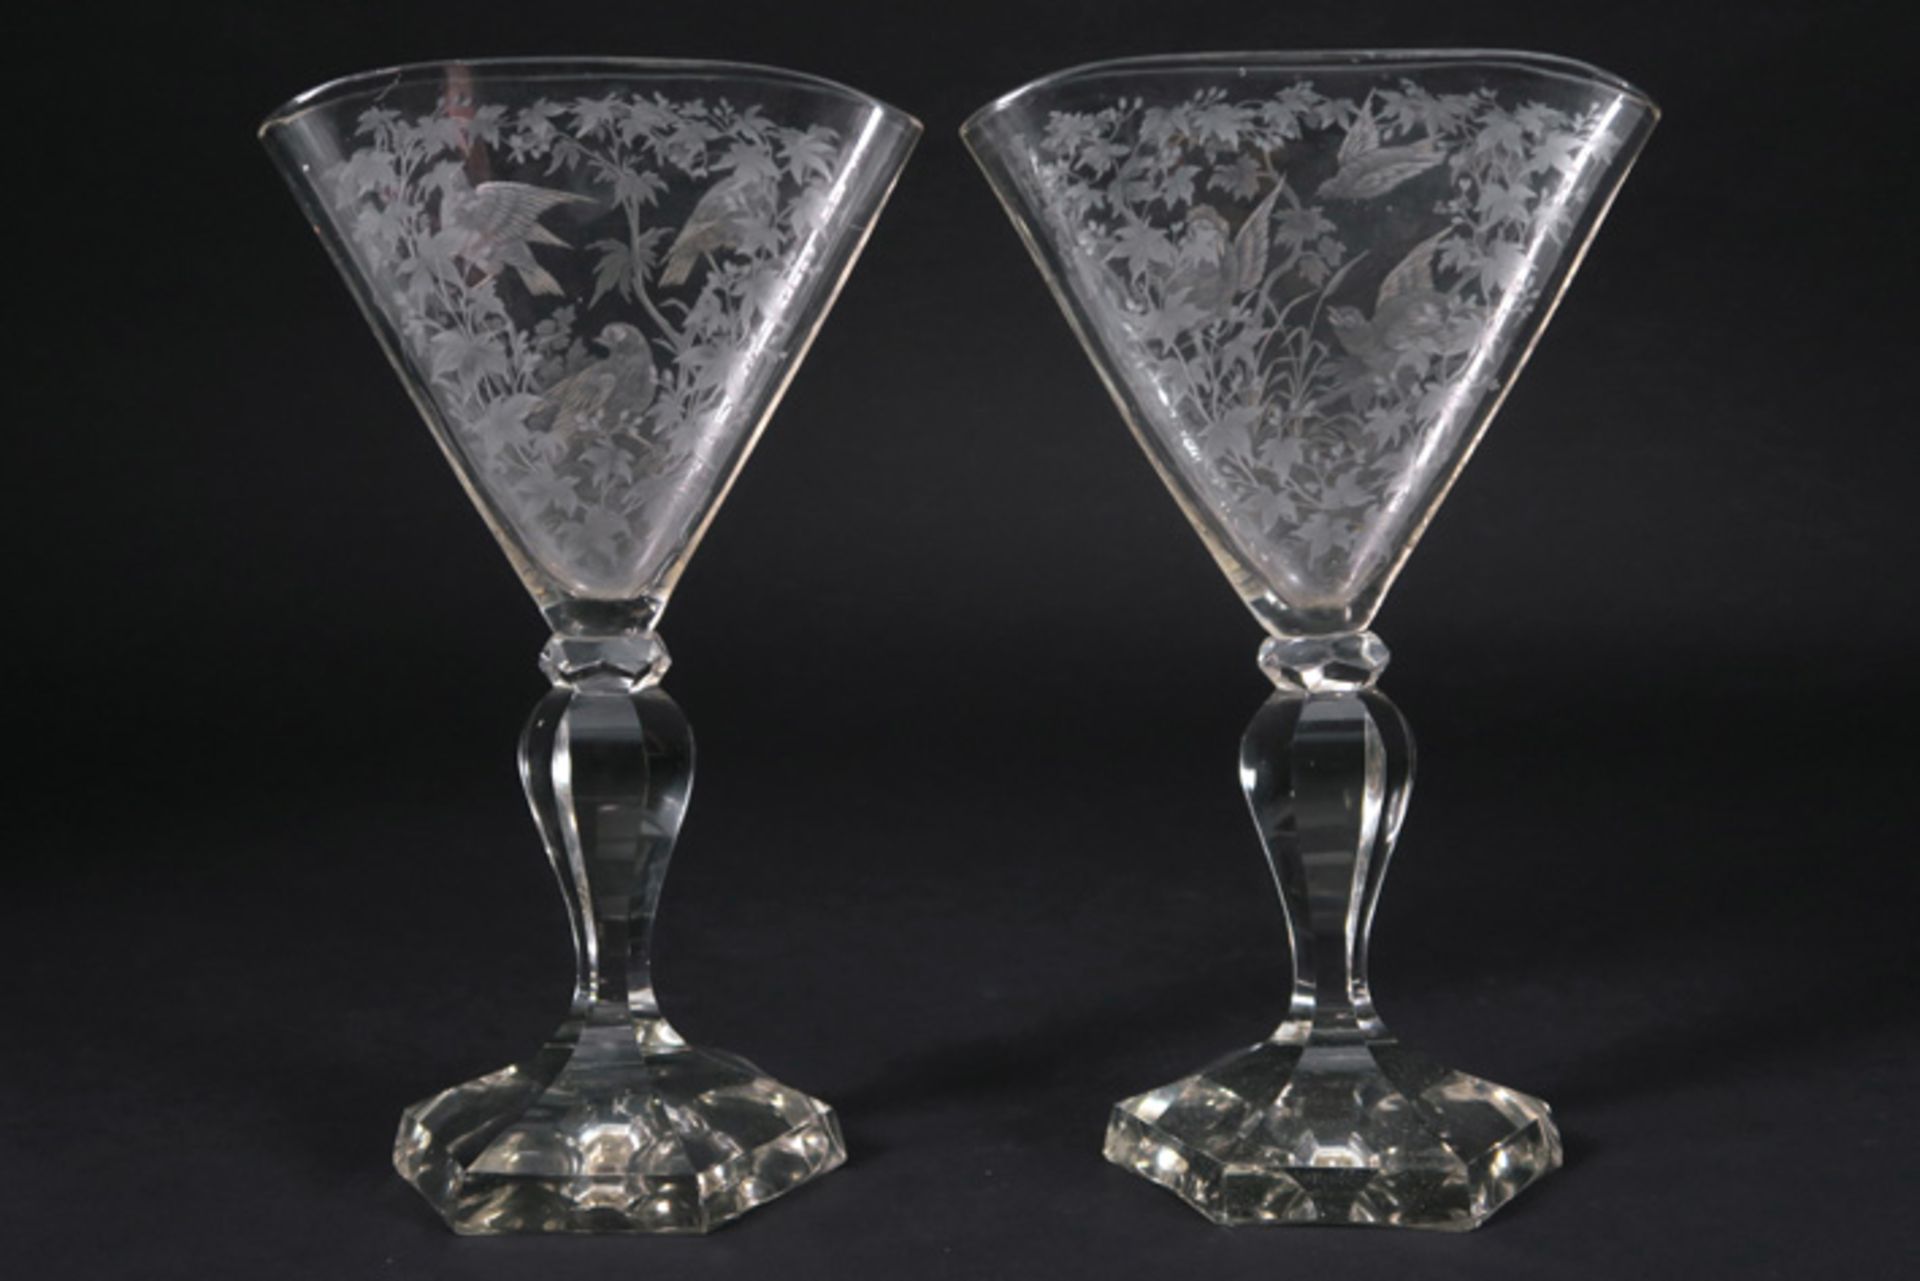 pair of antique probably French vases with a special design in crystal and etched decors with